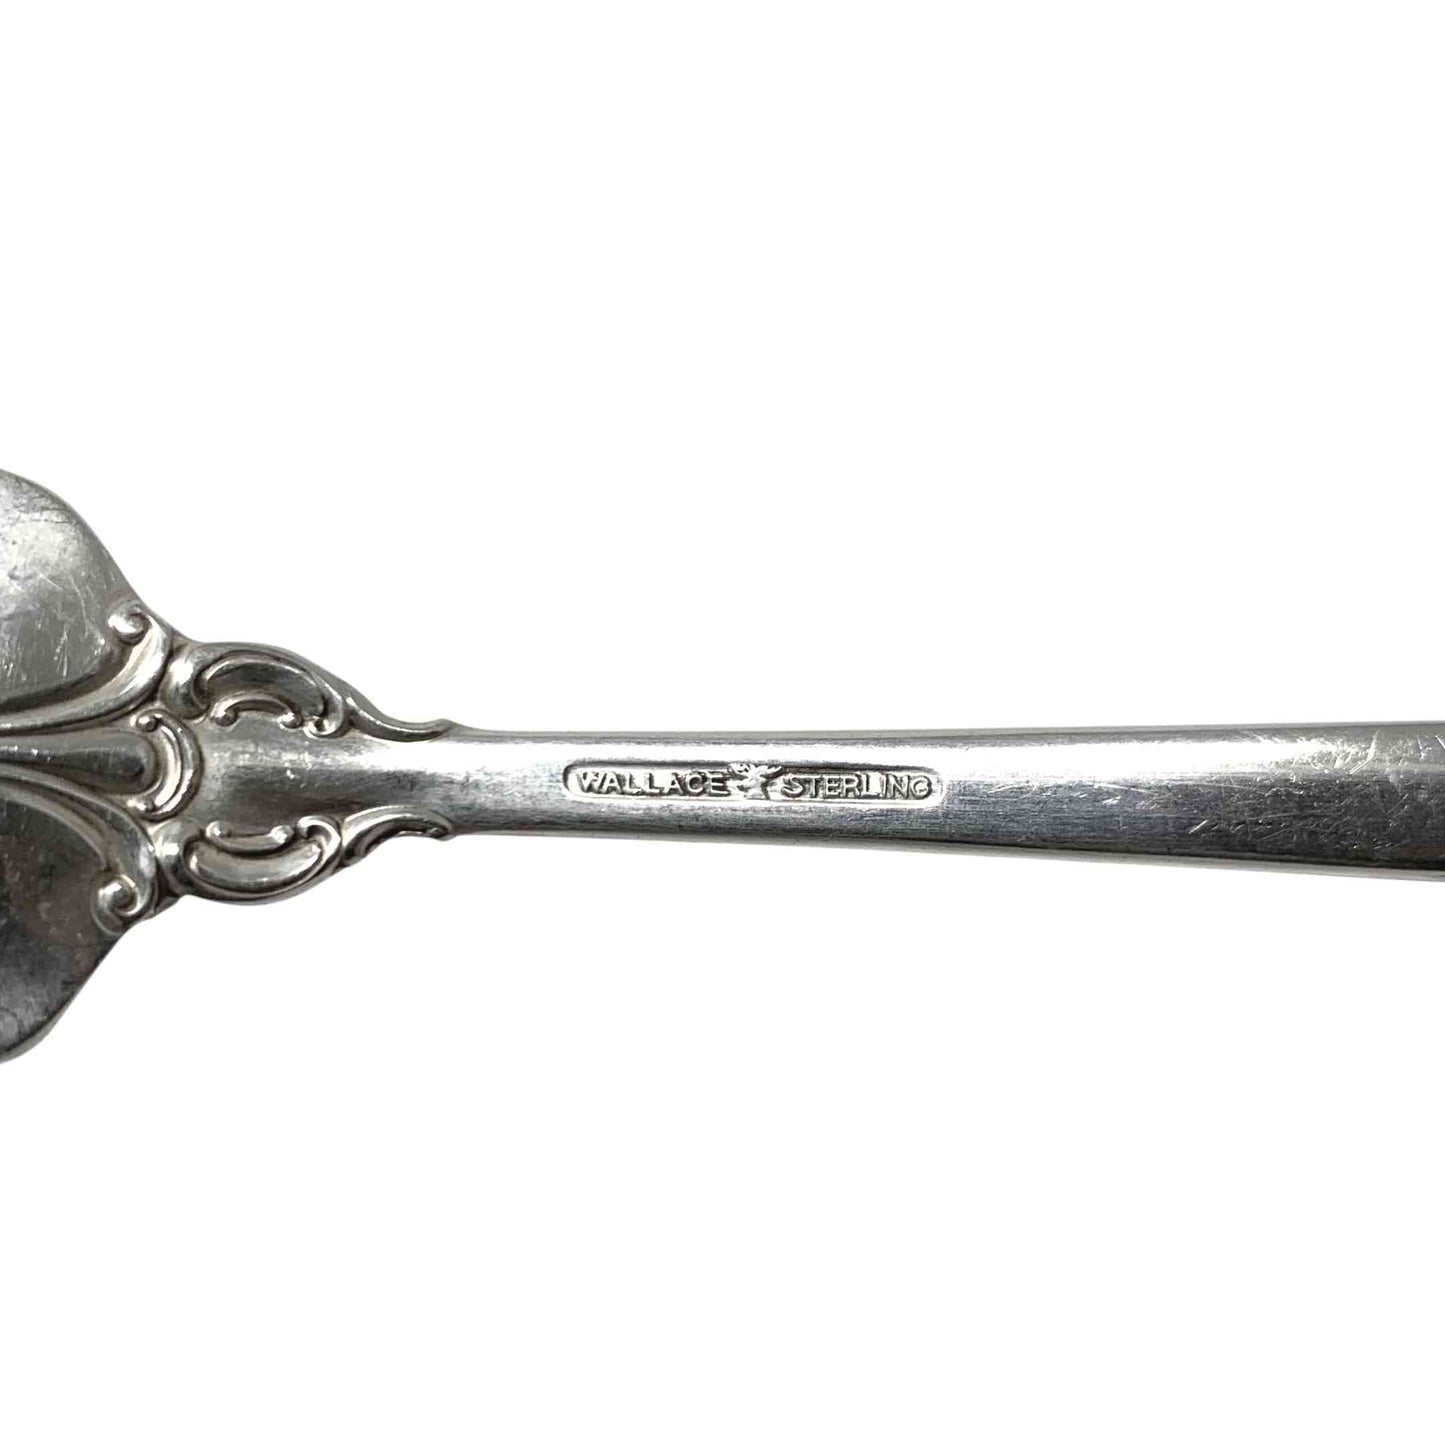 Wallace Grande Baroque Sterling Ice Cream Forks (4)